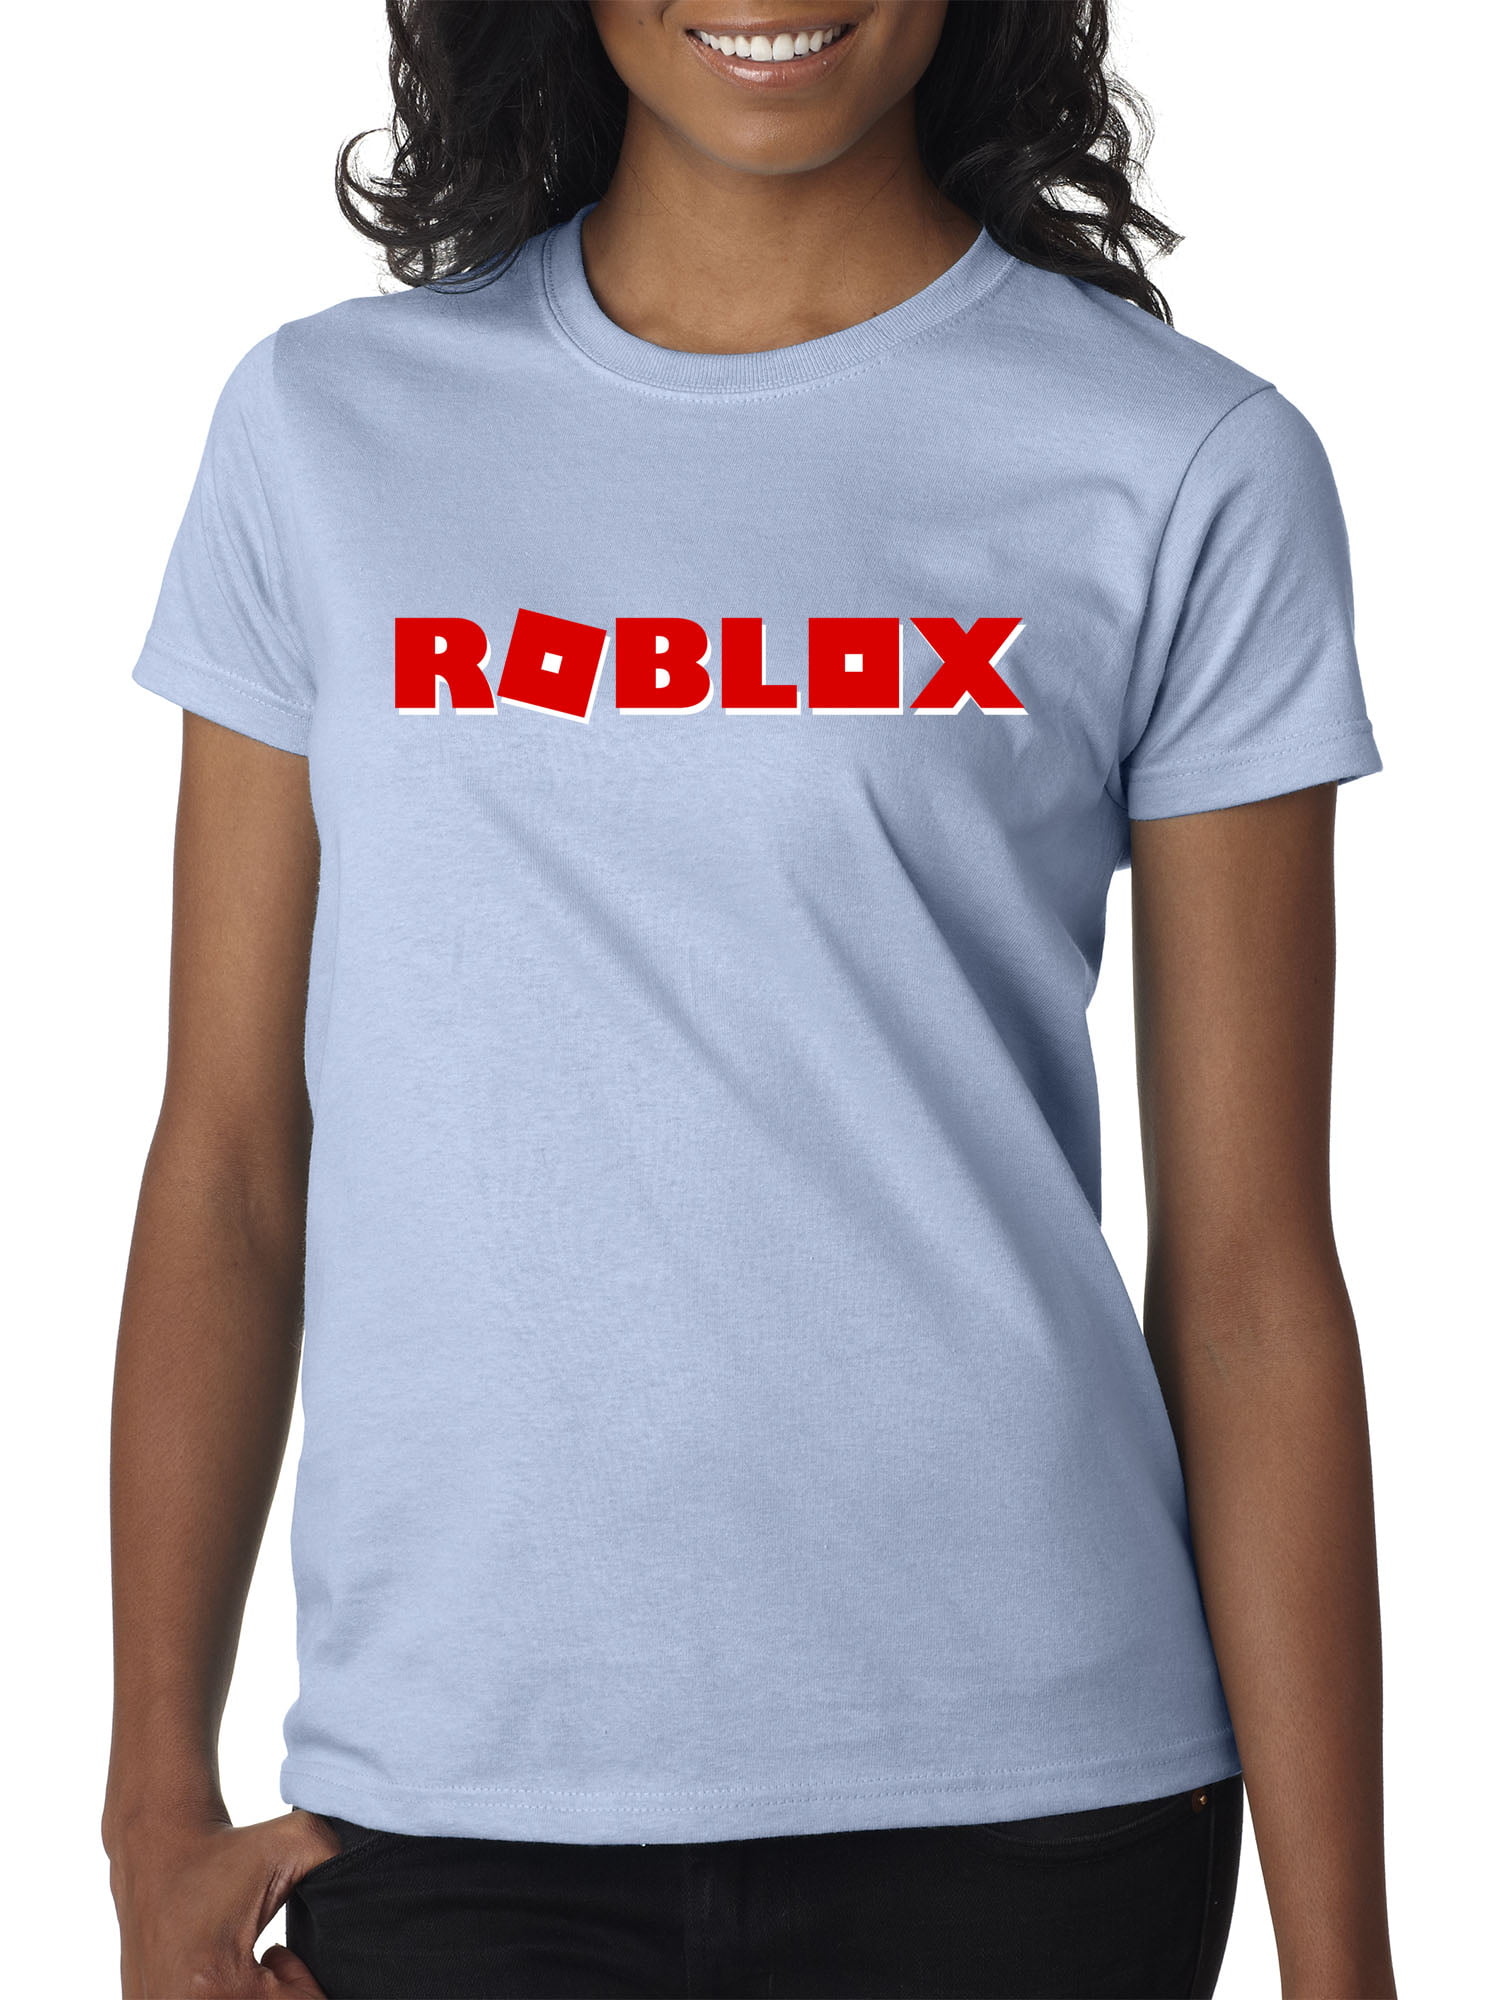 Roblox Logo Is Now Grey